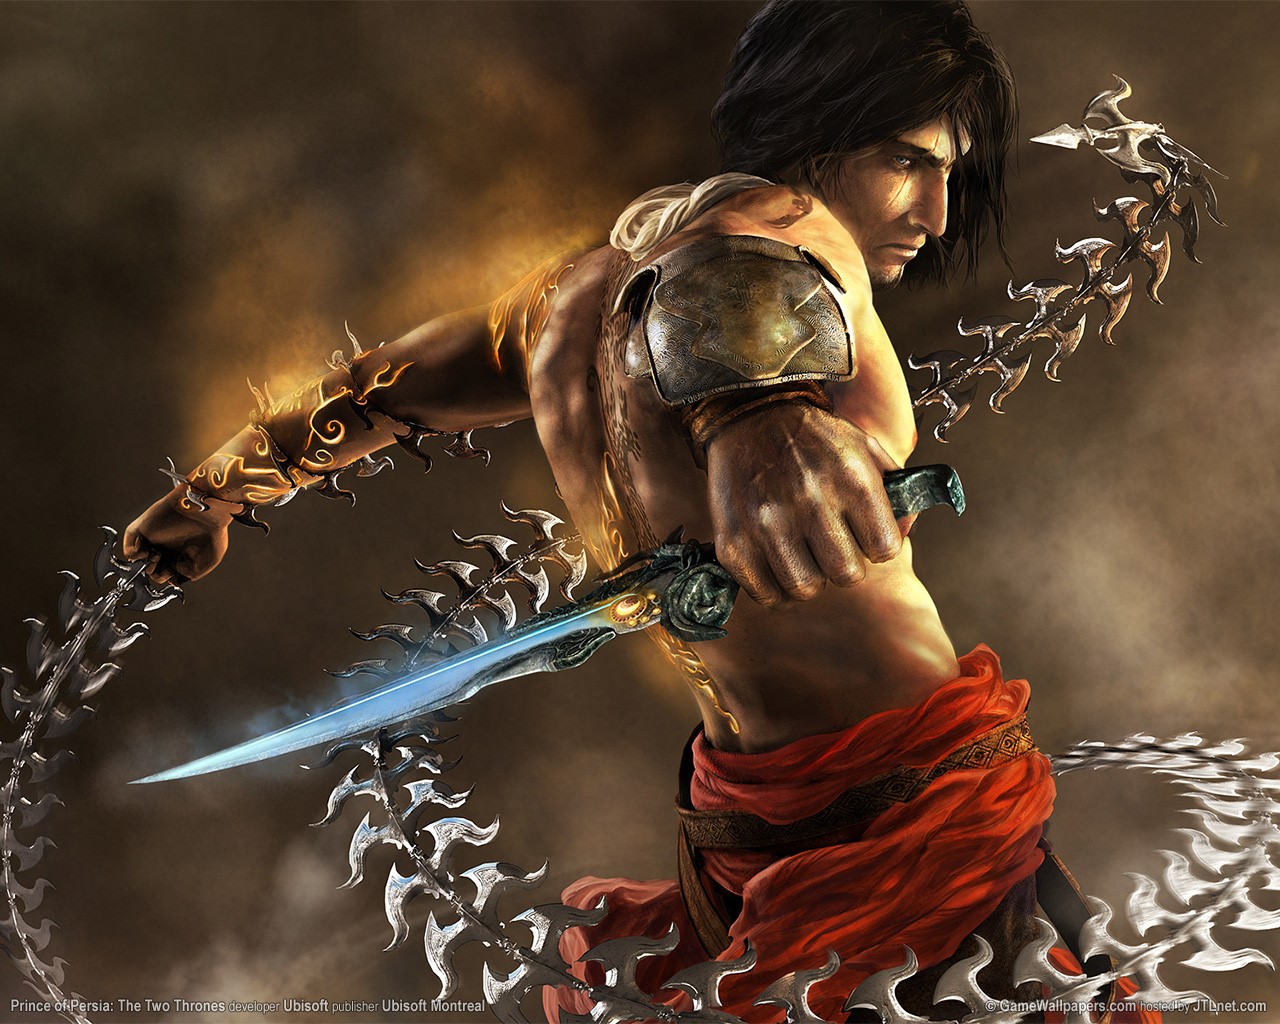 Prince Of Persia The Sands Of Time Pc Rip Multi5-Technic